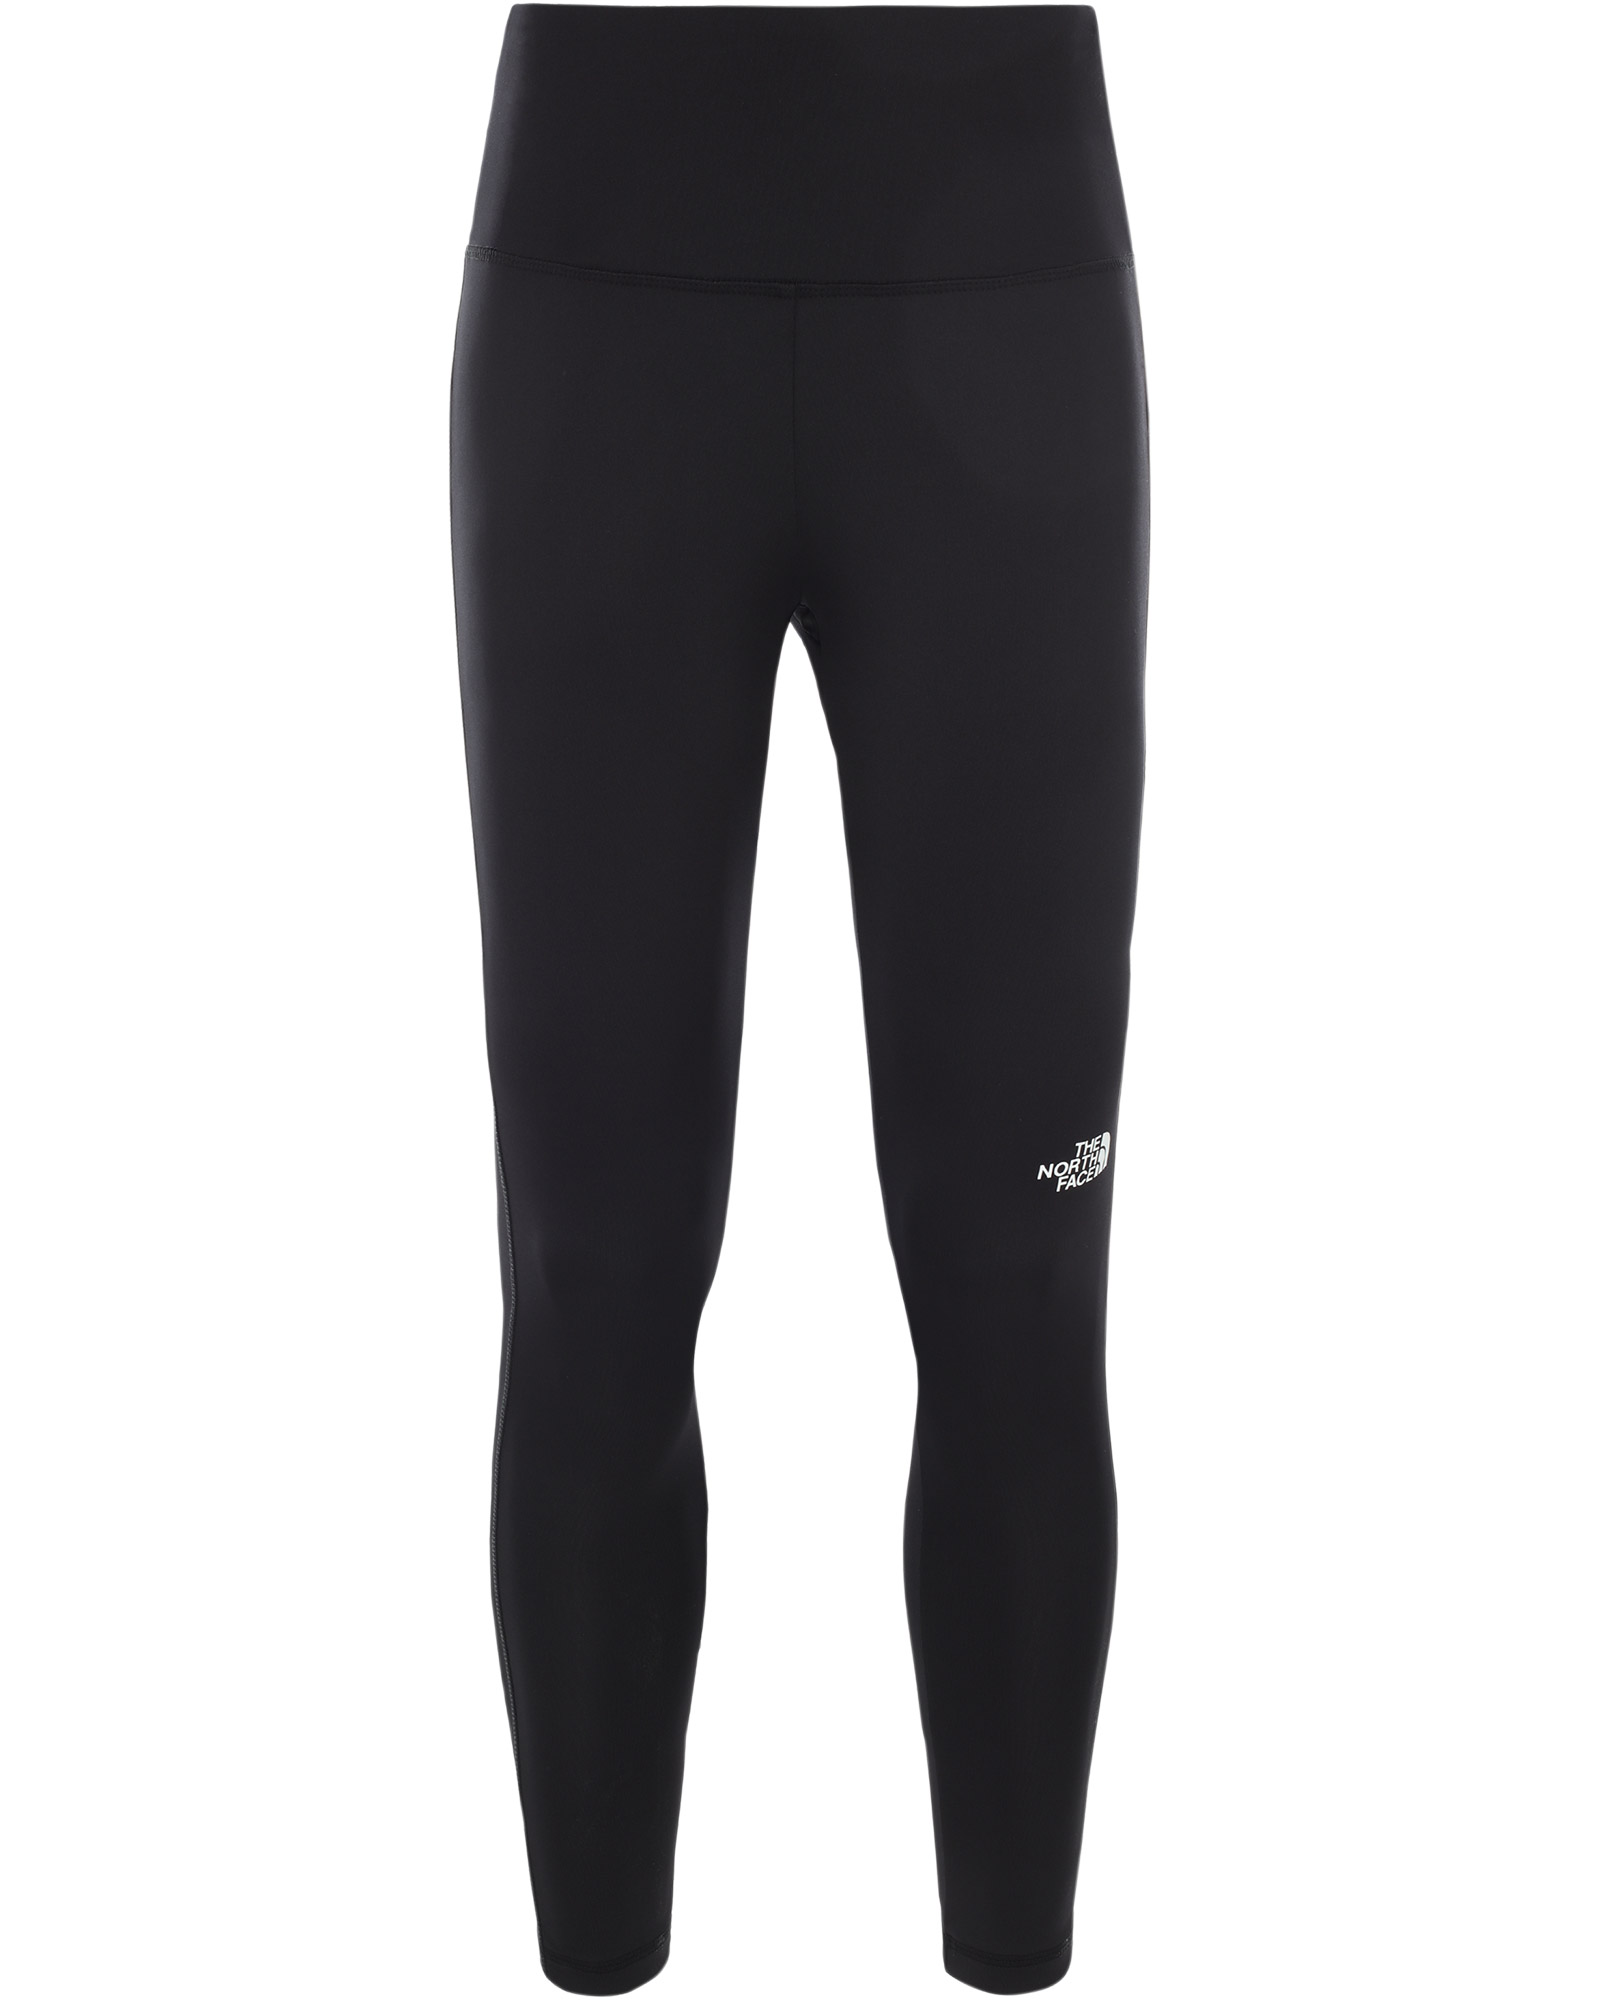 The North Face New Flex High Rise 7/8 Womens Tights